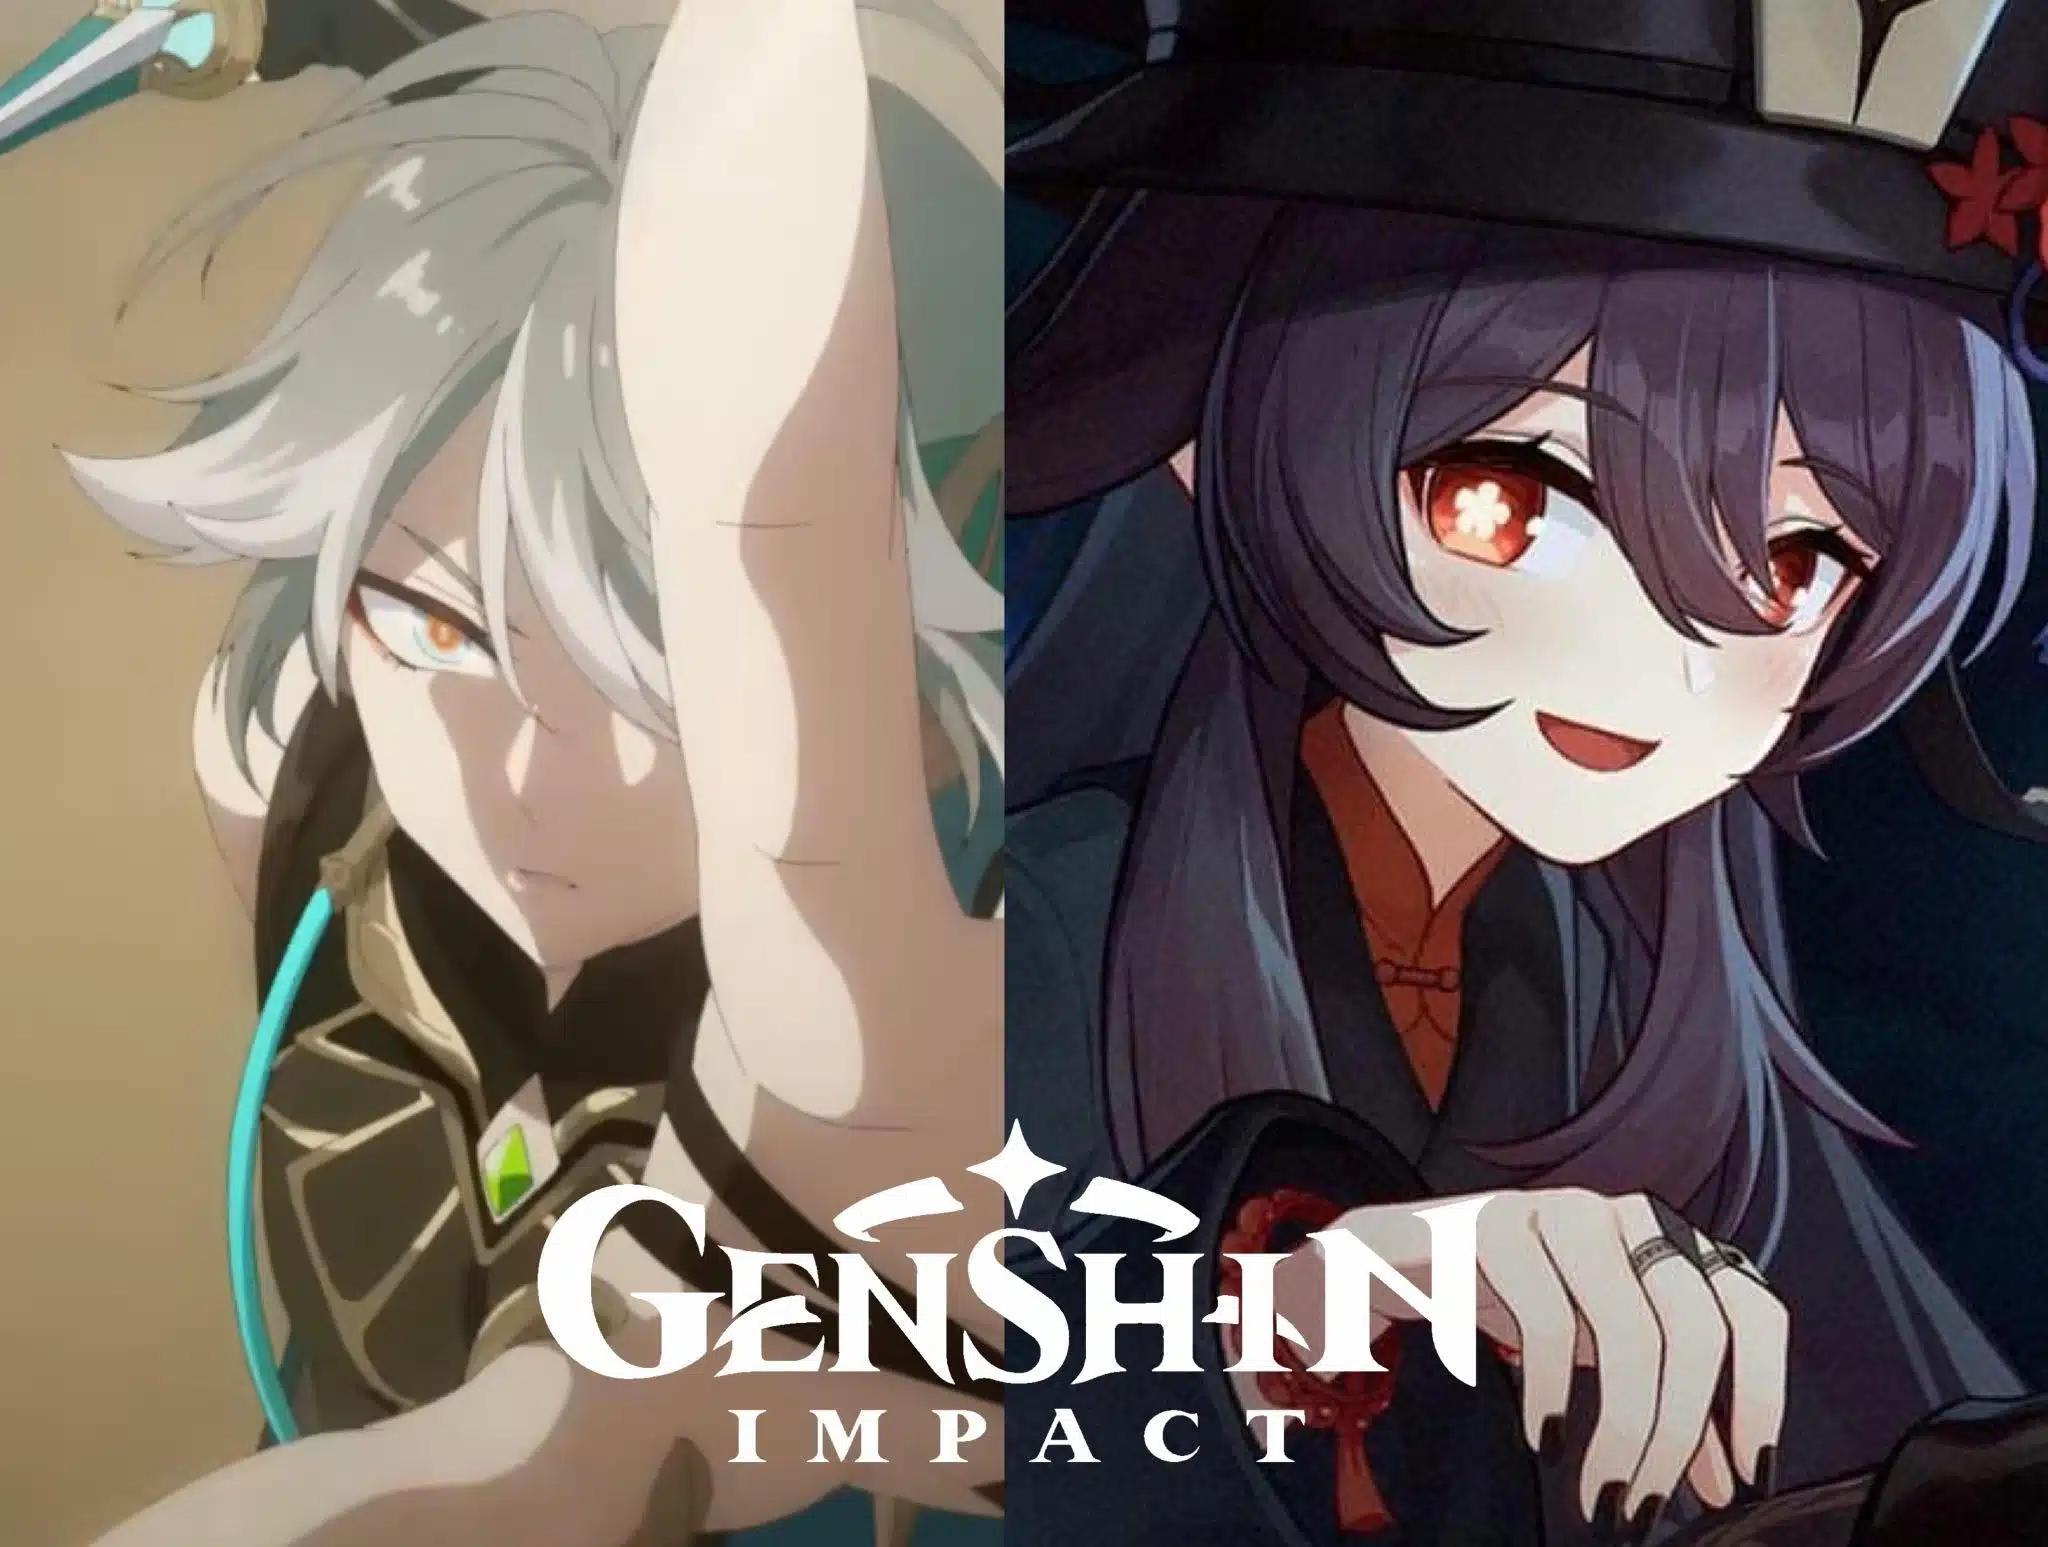 Genshin Impact 3.4 livestream: Expected date, time, and redeem code details